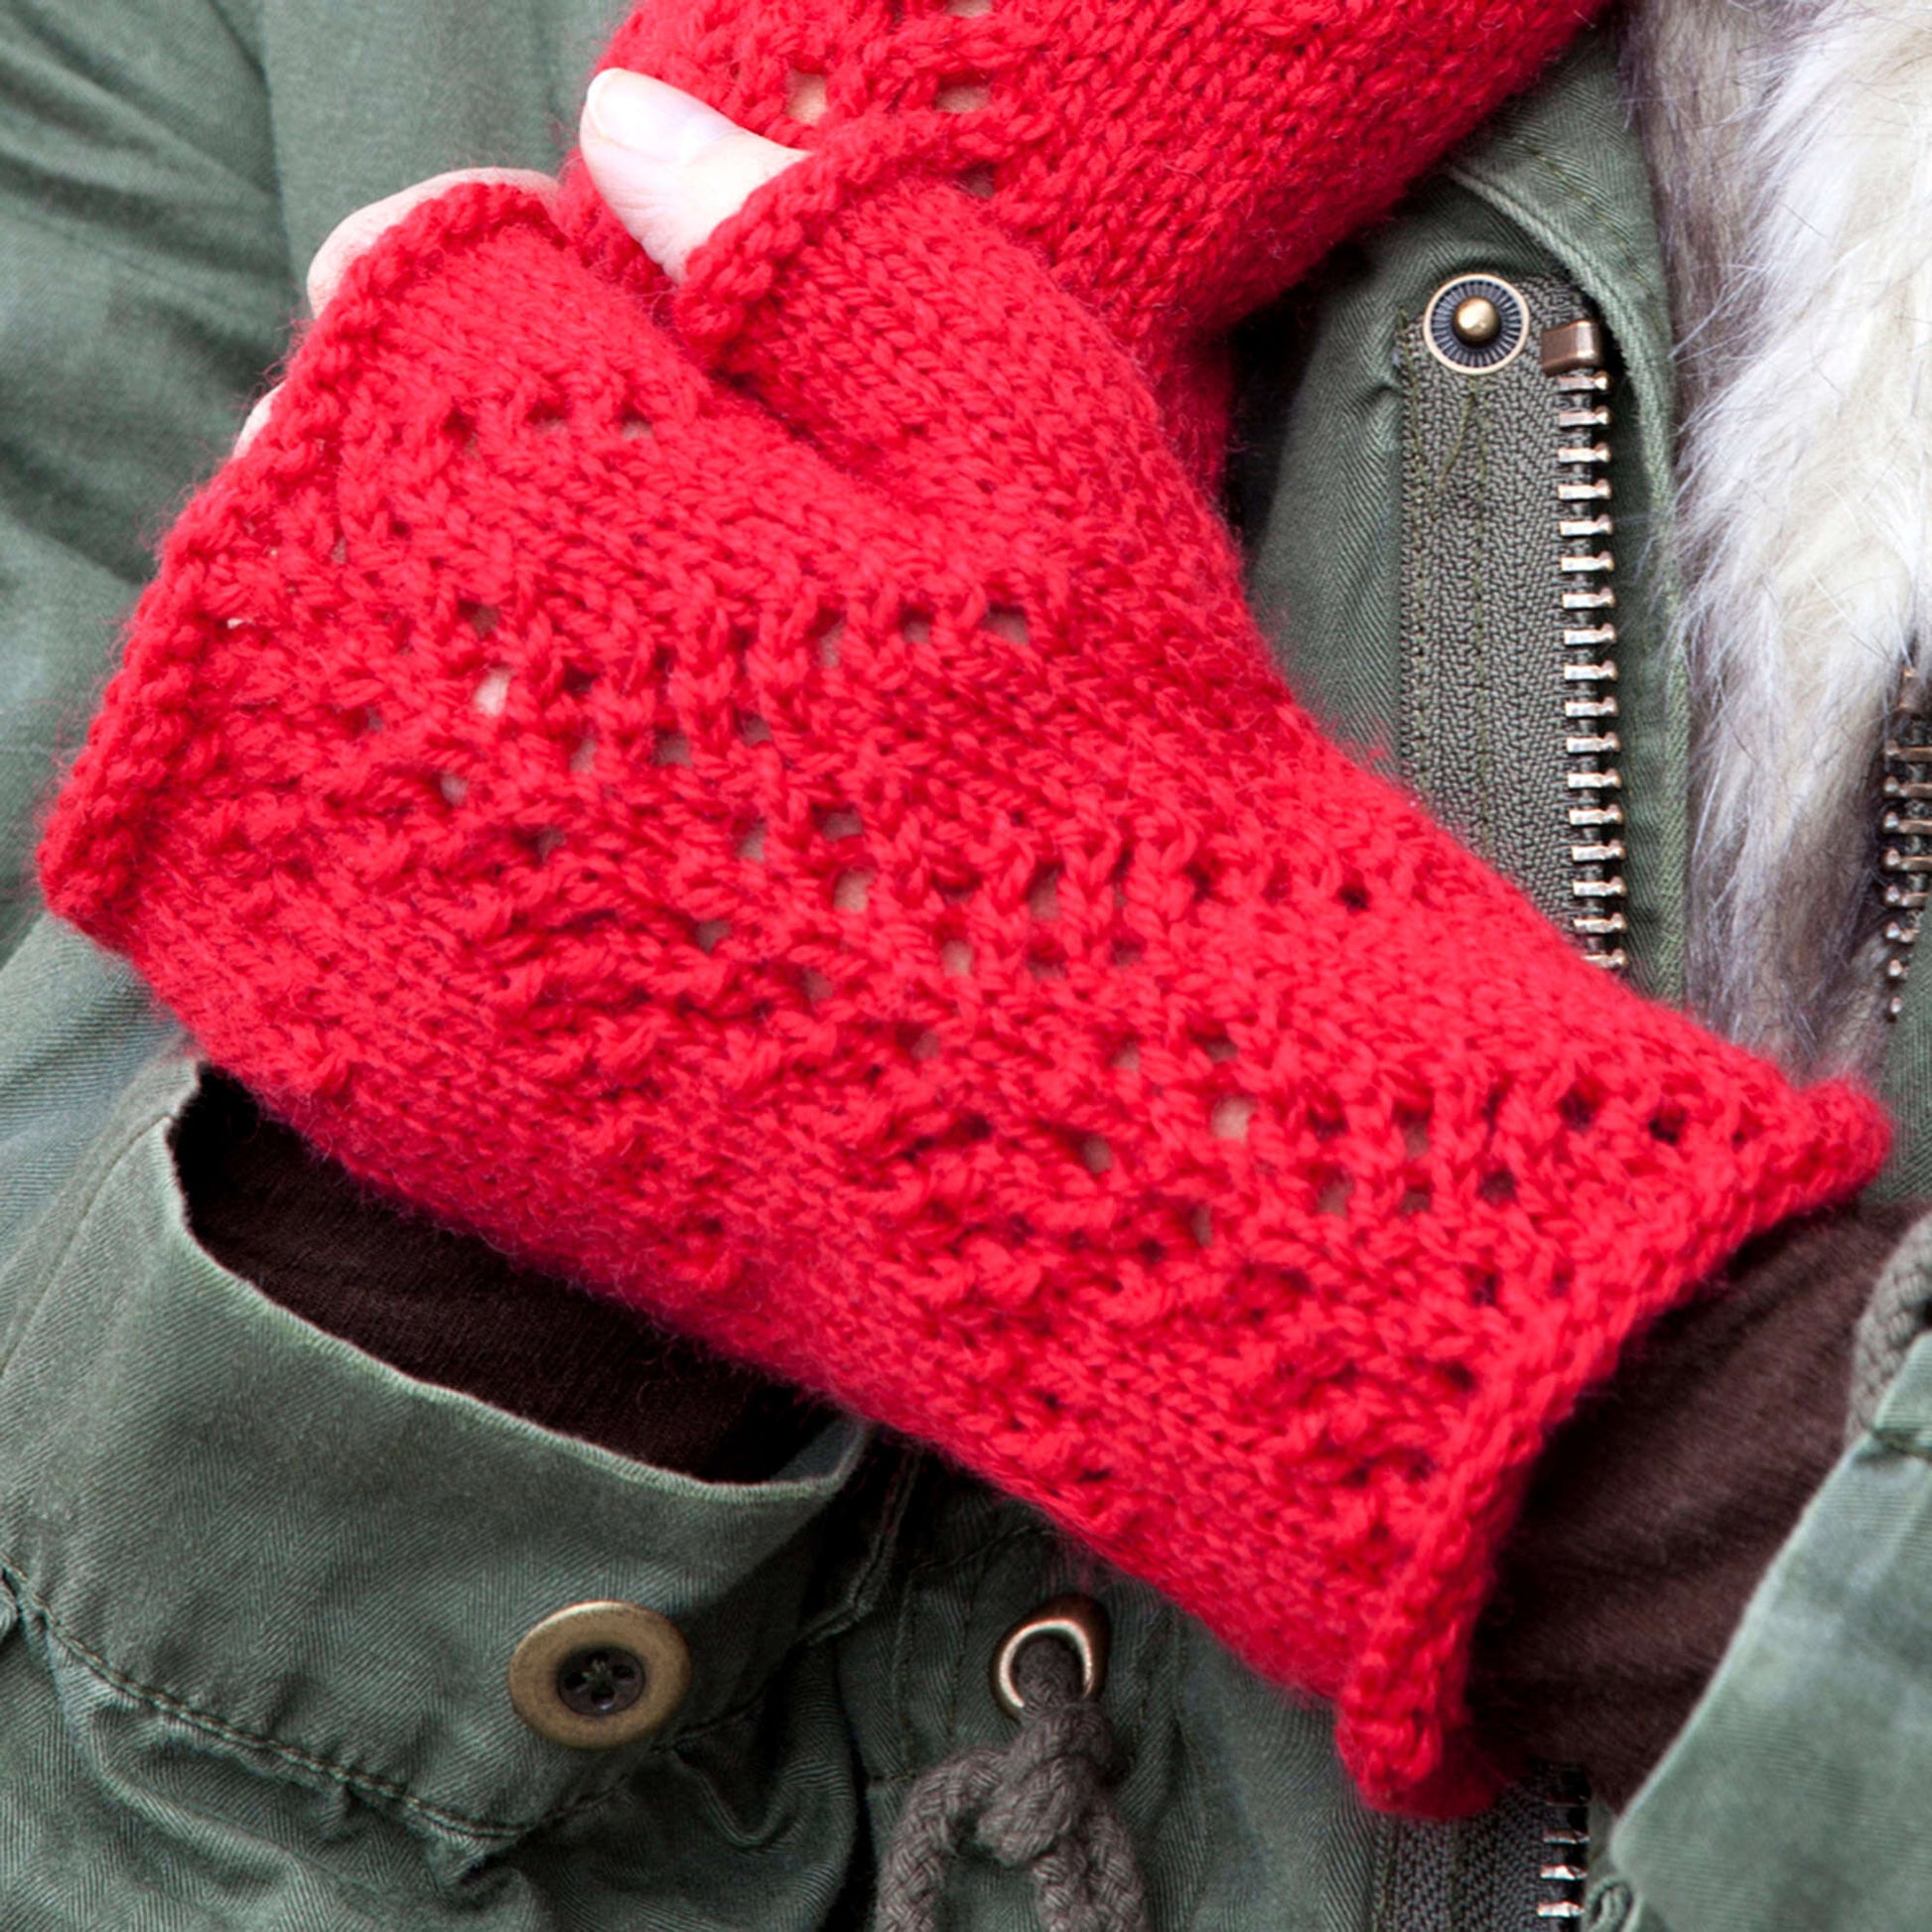 Free Red Heart Strolling Mitts Knit Pattern